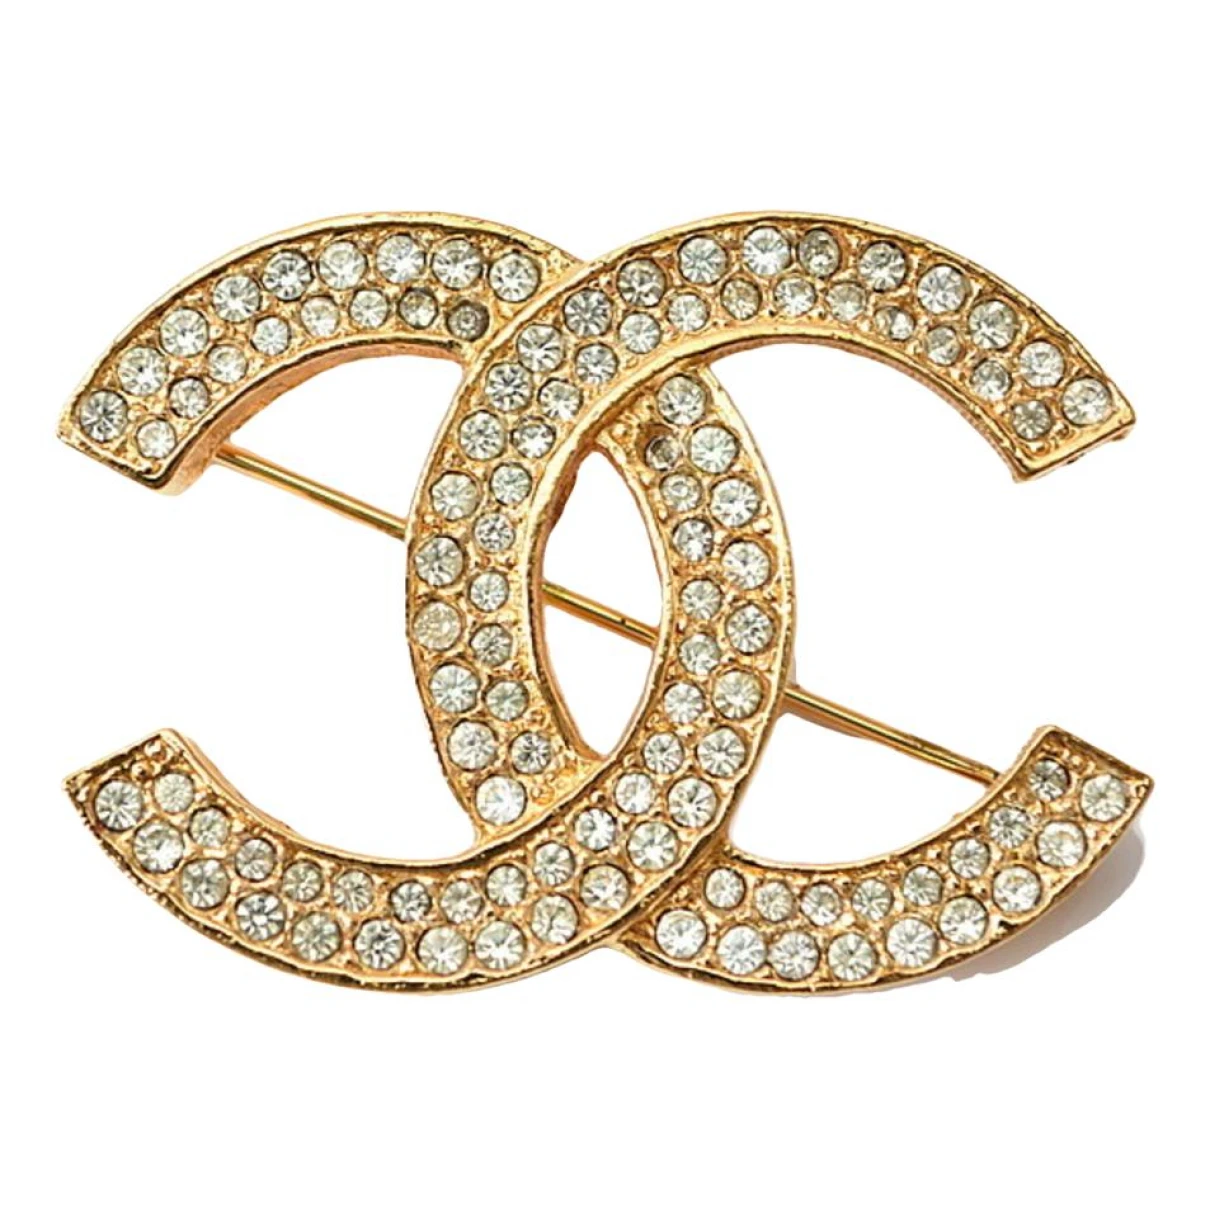 jewellery Chanel pins & brooches for Female Metal. Used condition